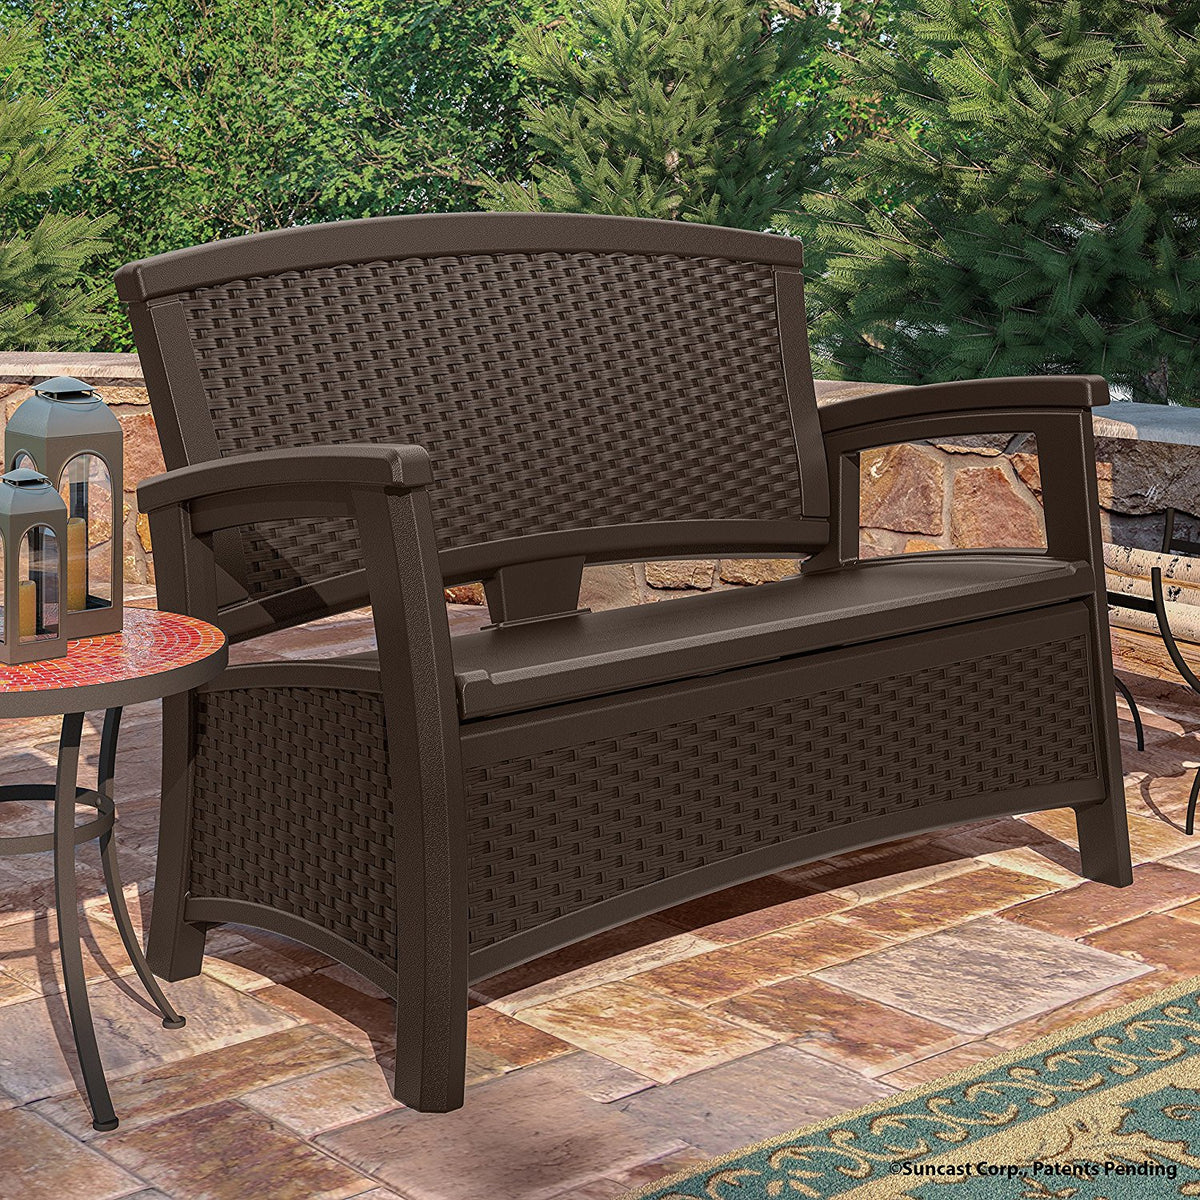 buy outdoor storage benches at cheap rate in bulk. wholesale & retail outdoor furniture & grills store.